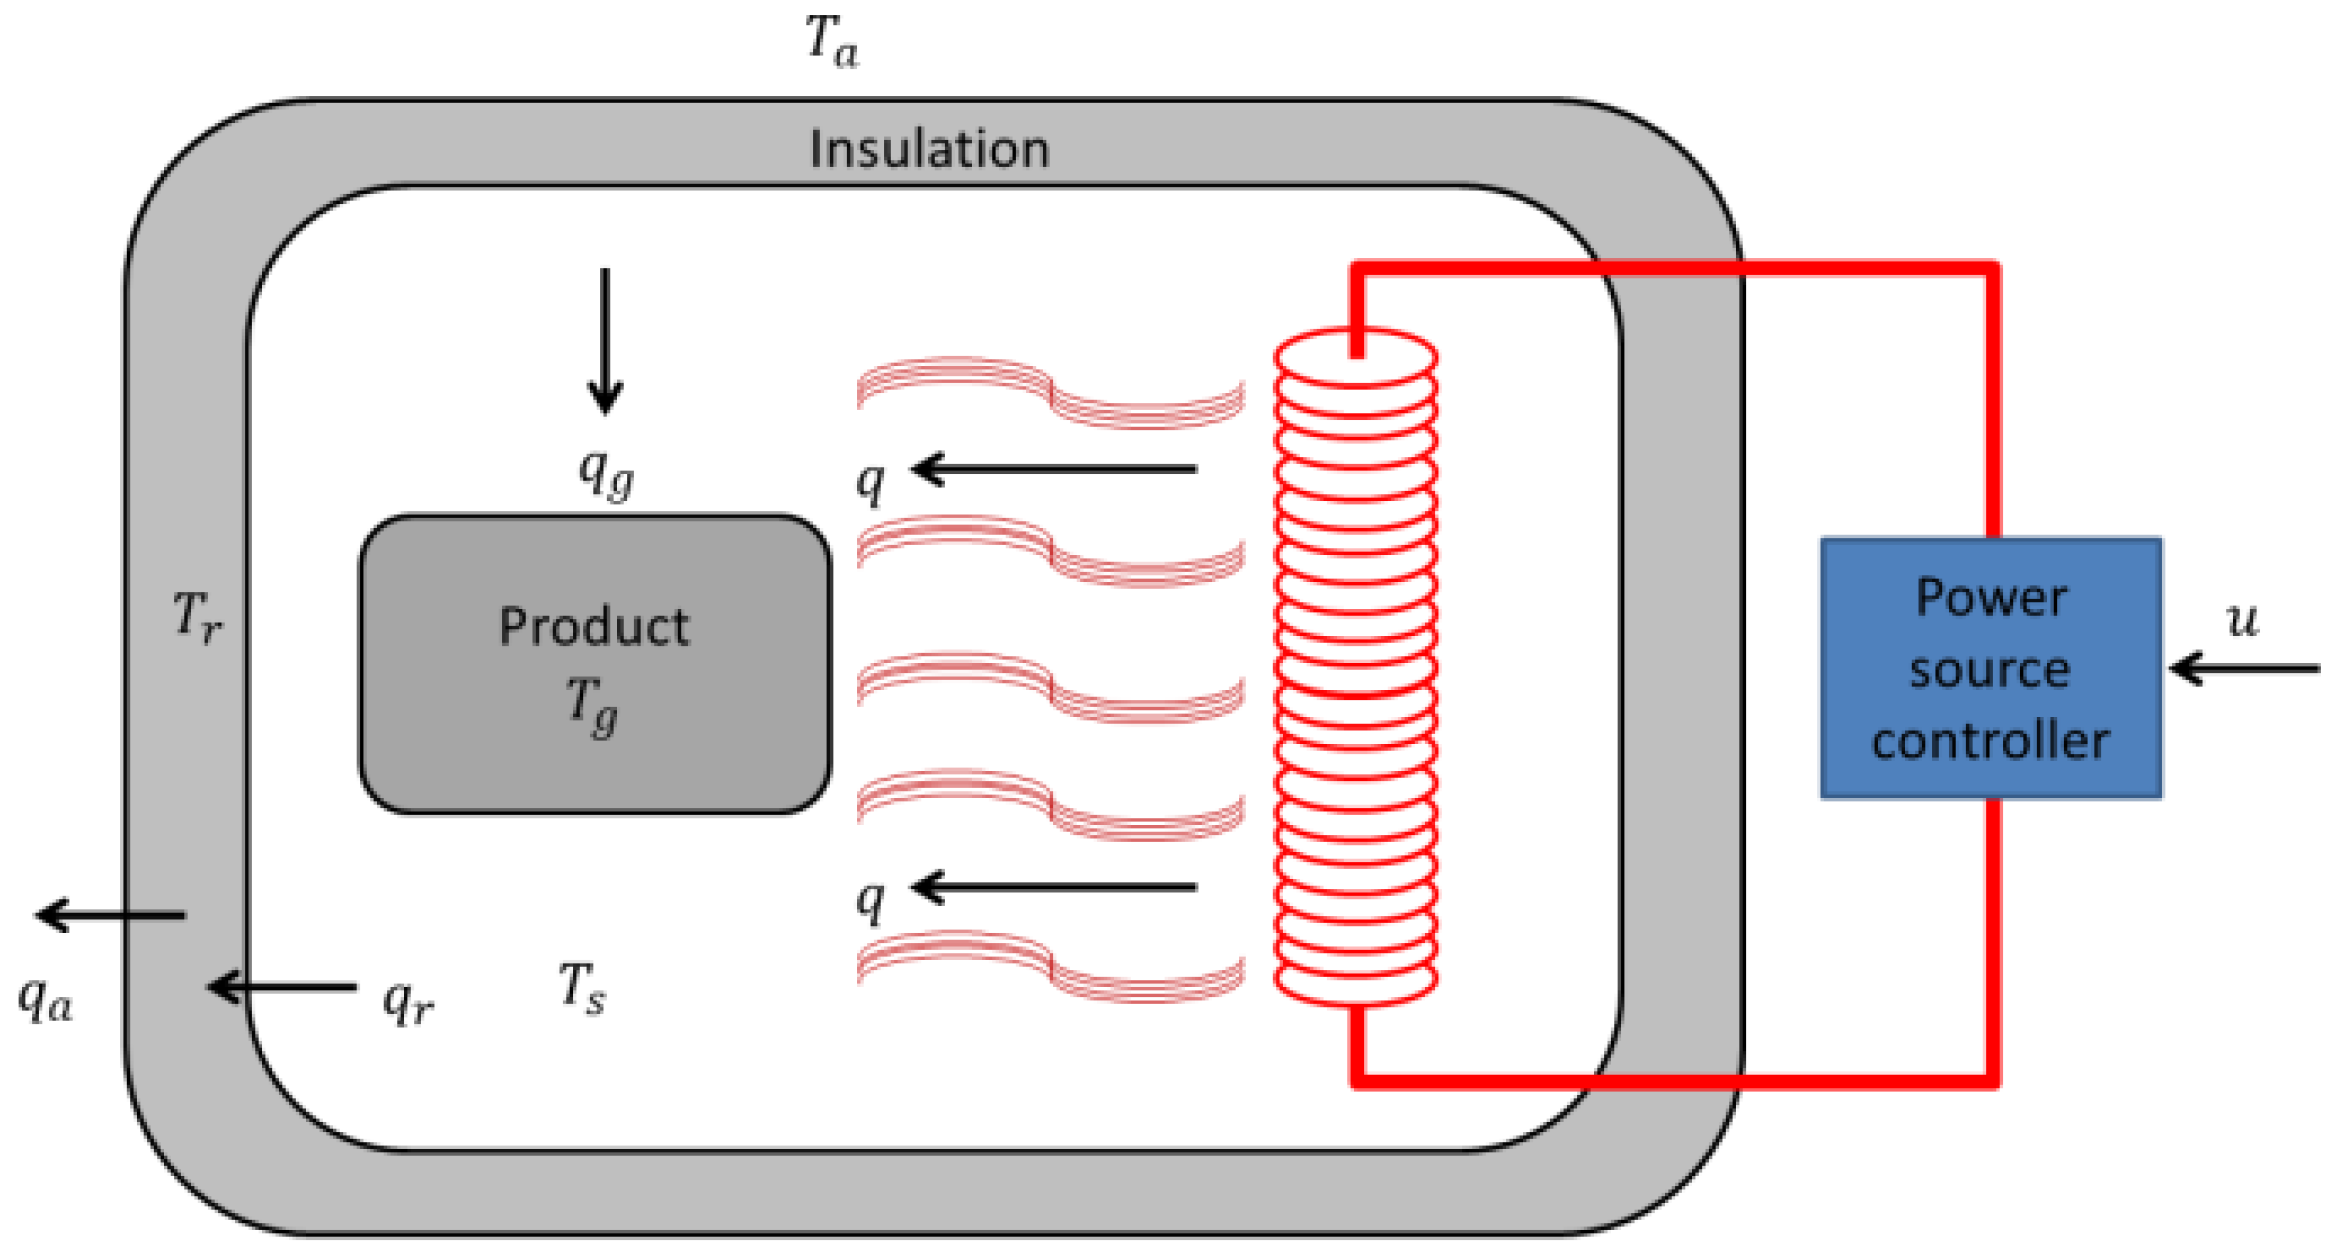 Symmetry Free Full Text The Regulation Of An Electric Oven And An Inverted Pendulum